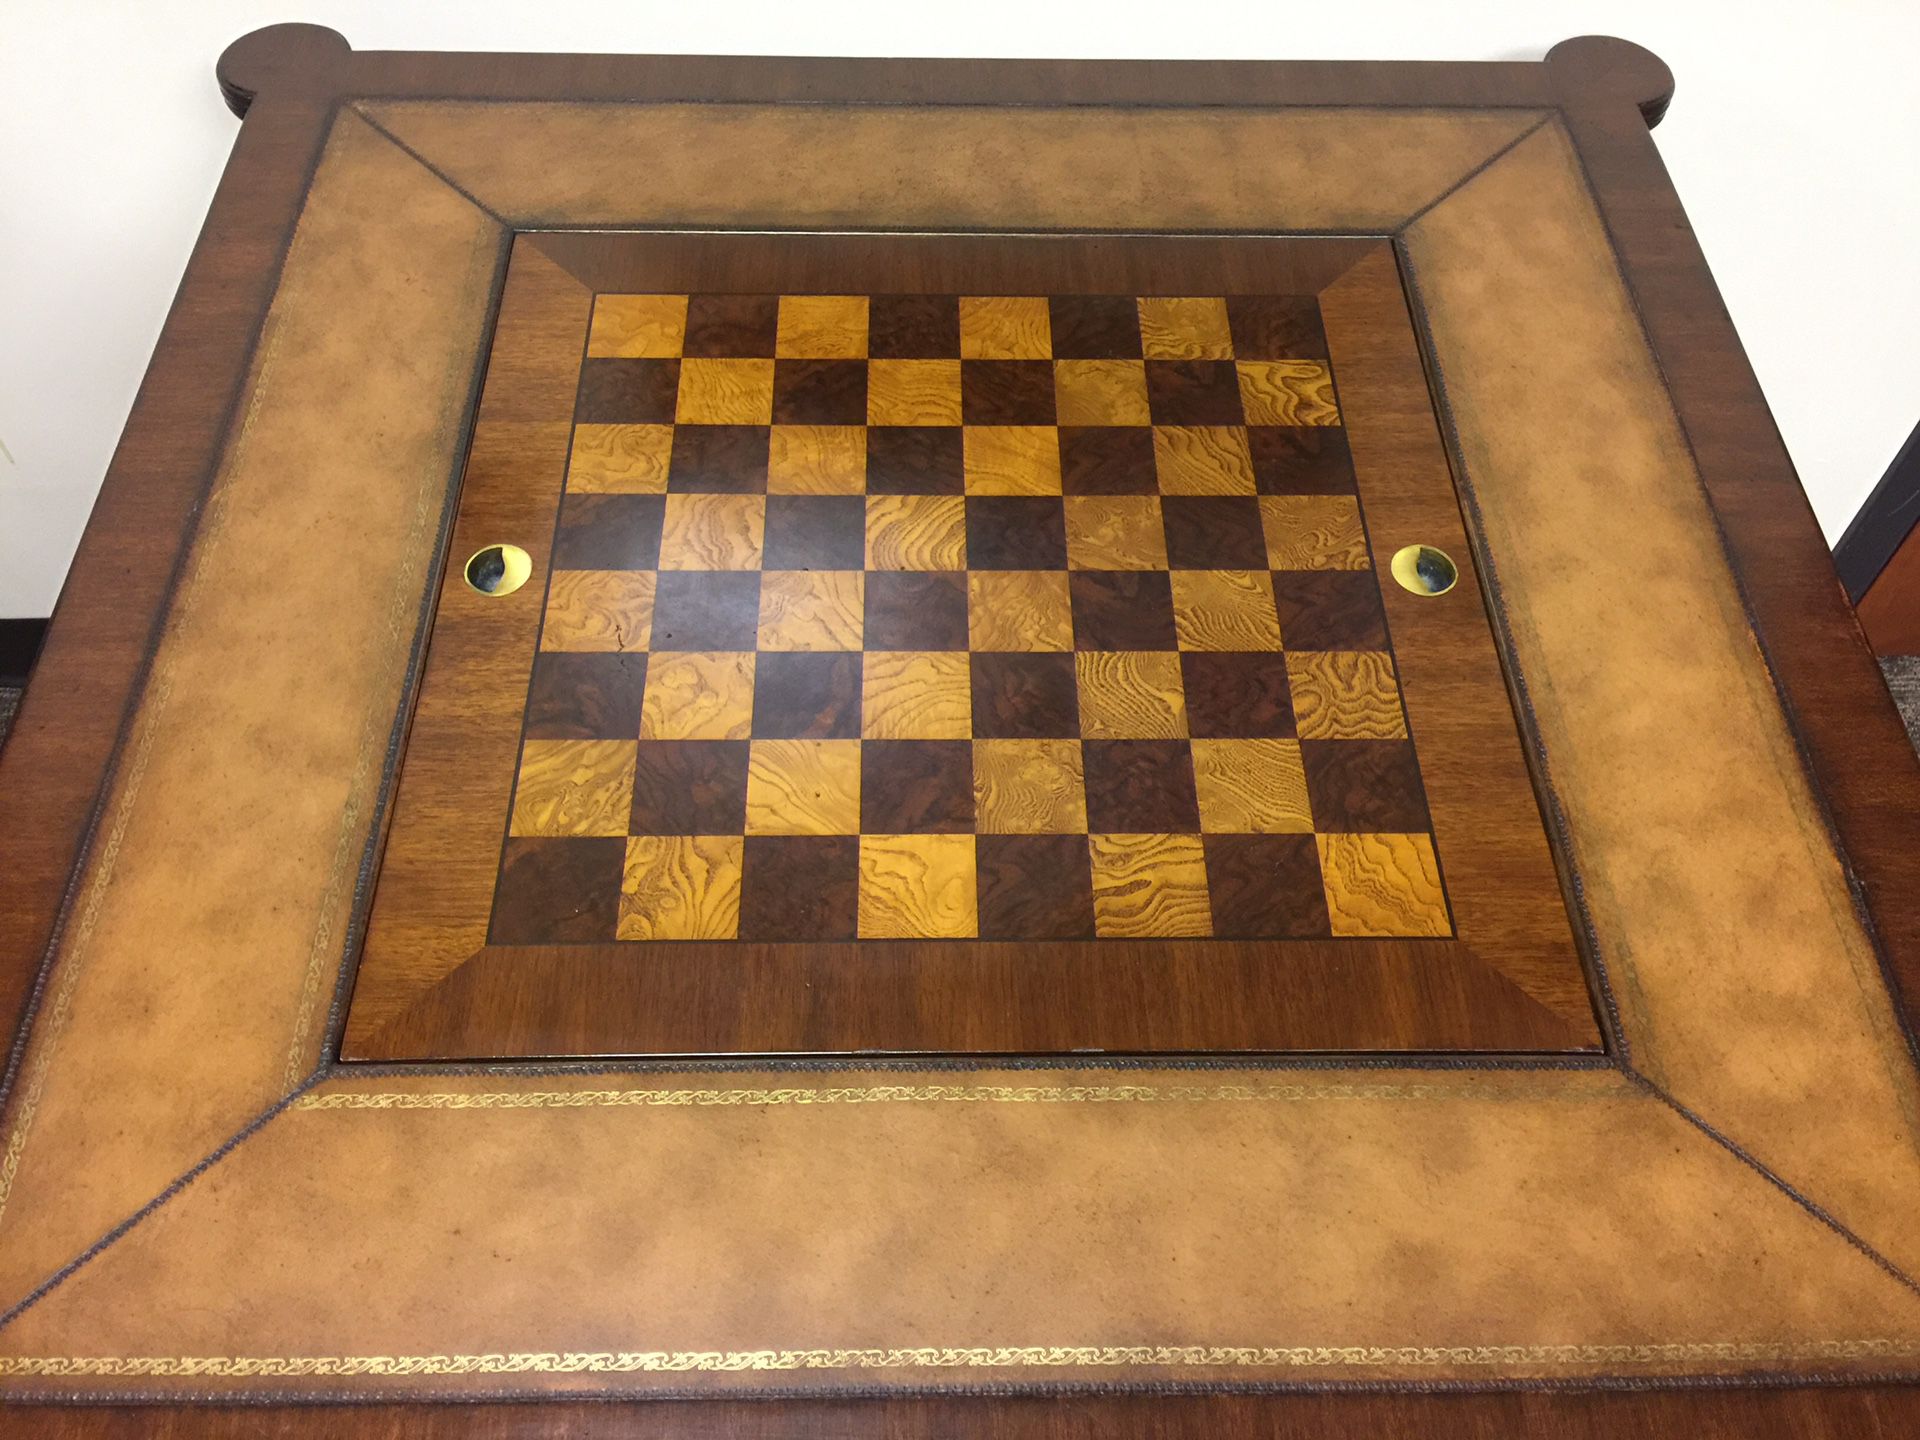 Ethan Allen Reversible Game Table (Chess, Checkers, Backgammon, Cards),  Leather & Inlaid Wood for Sale in Maitland, FL - OfferUp